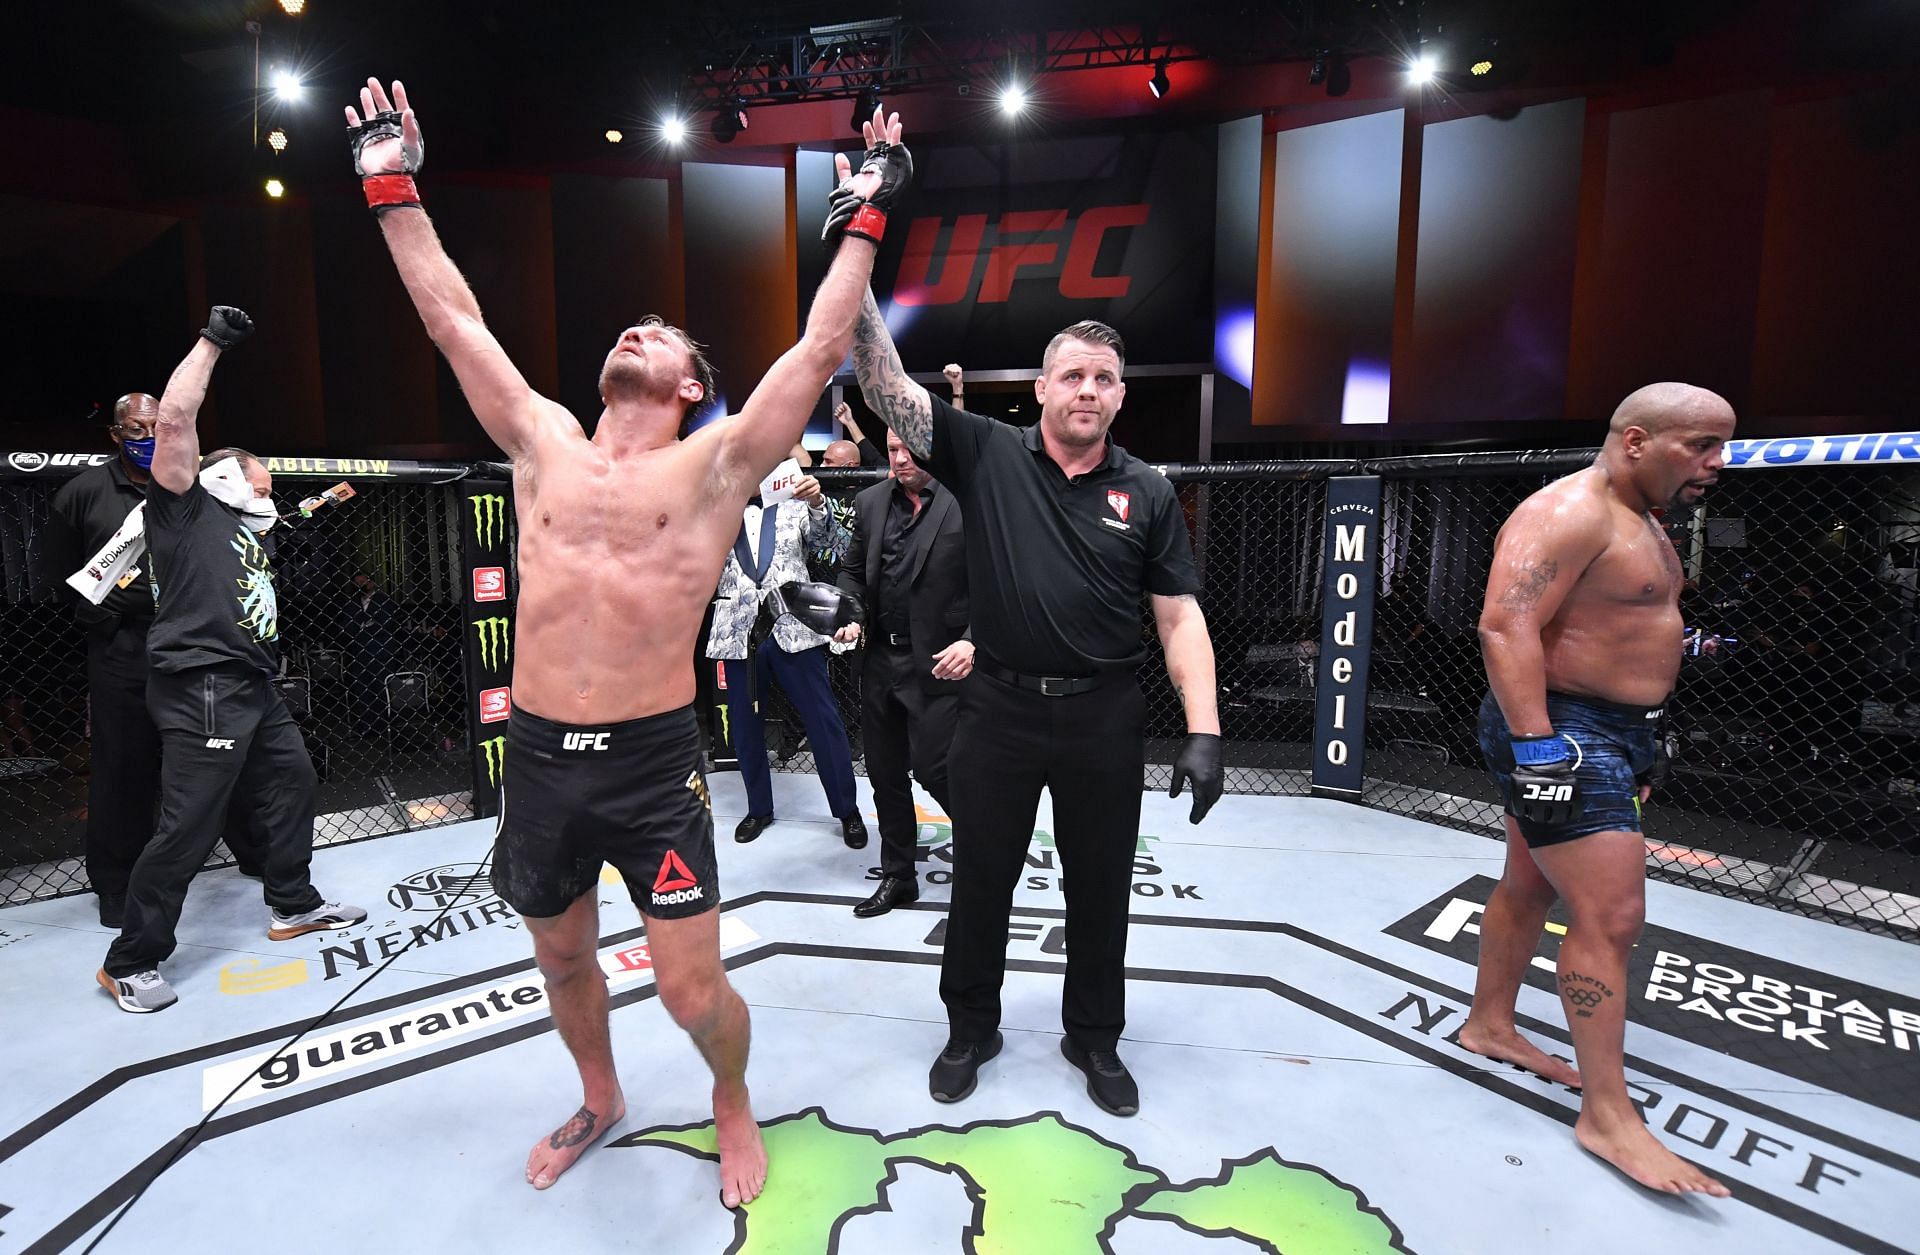 Stipe Miocic has more UFC heavyweight title defenses than any other fighter